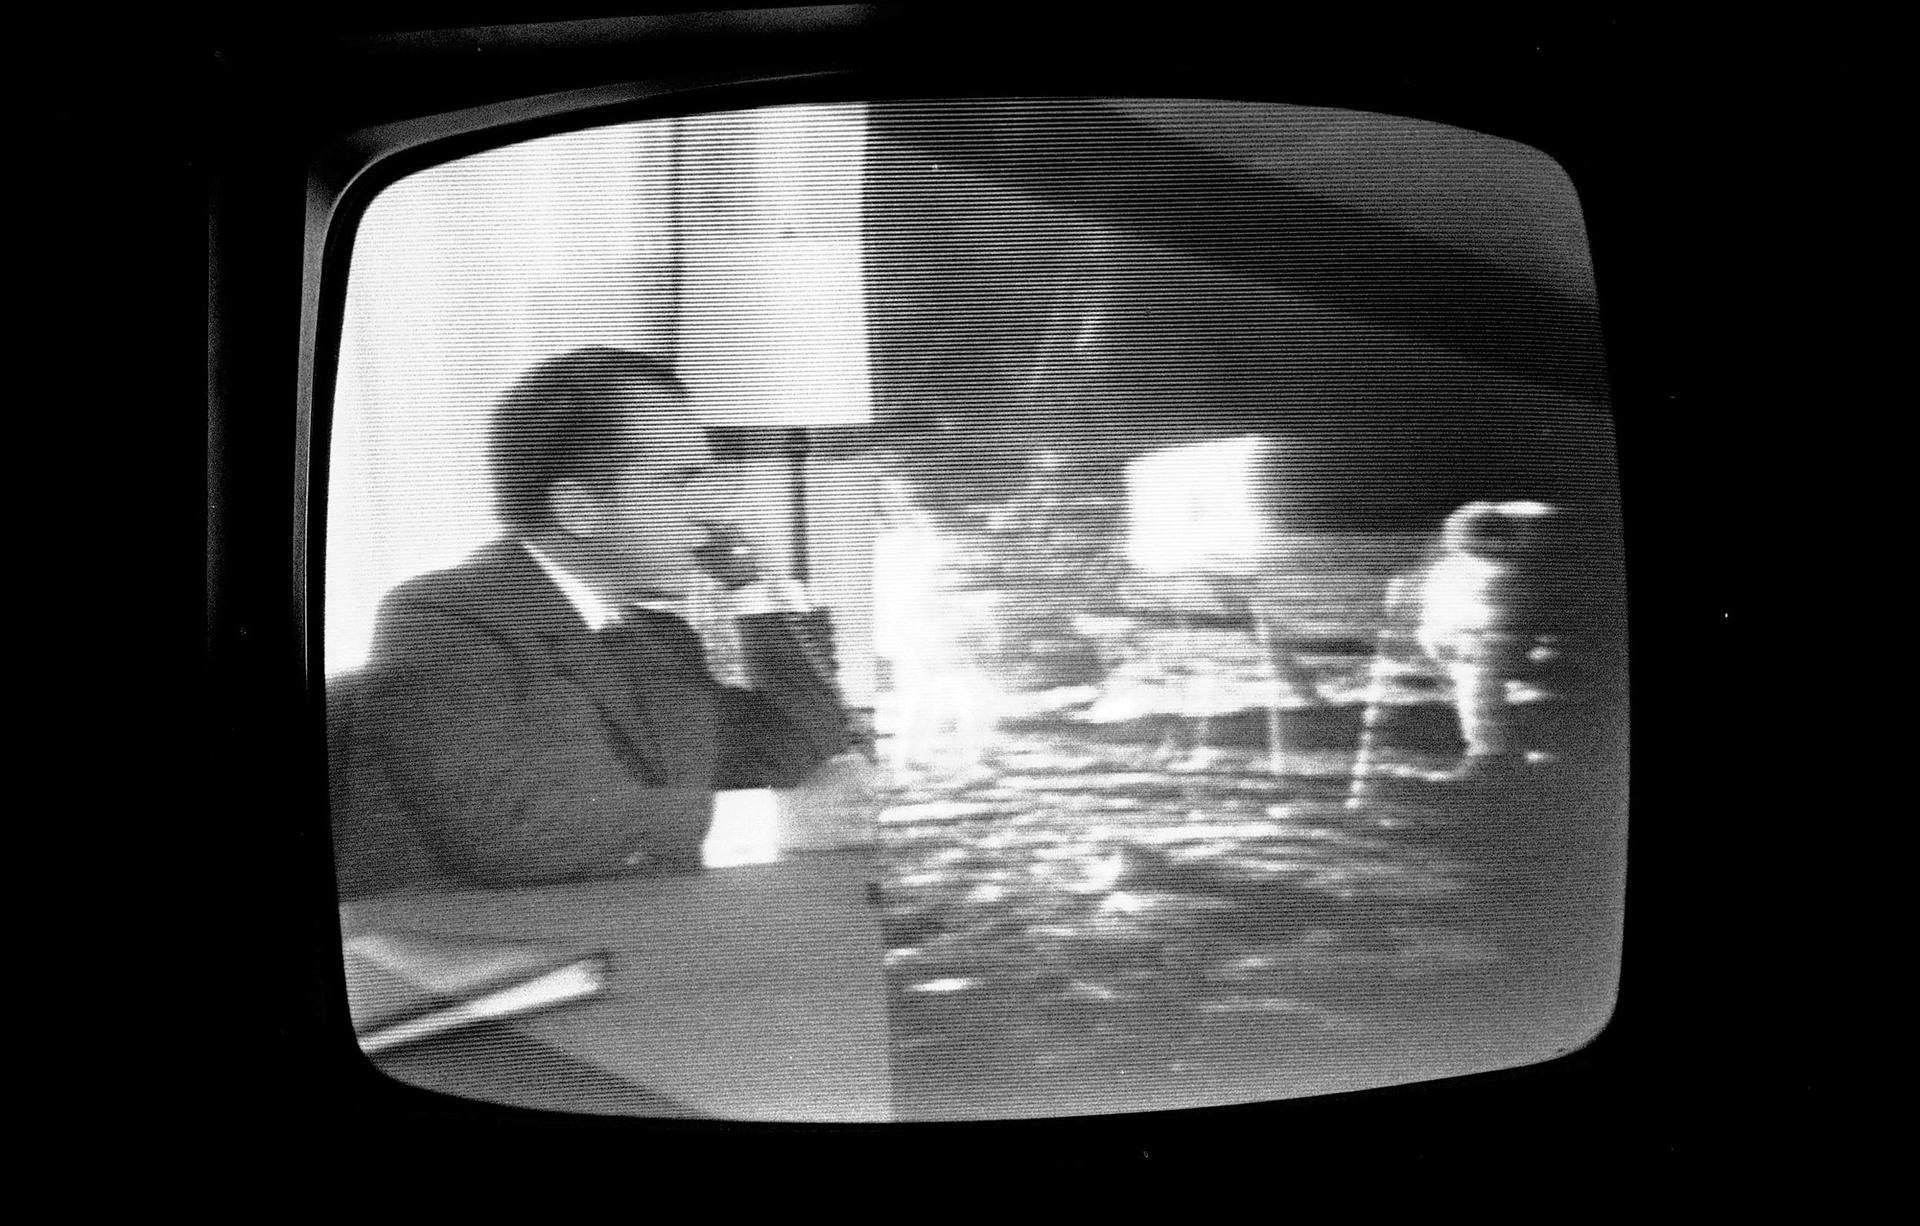 In a photograph of a television,  President Richard Nixon is shown on the left and Apollo 11 crew is shown on the right all in black and white.